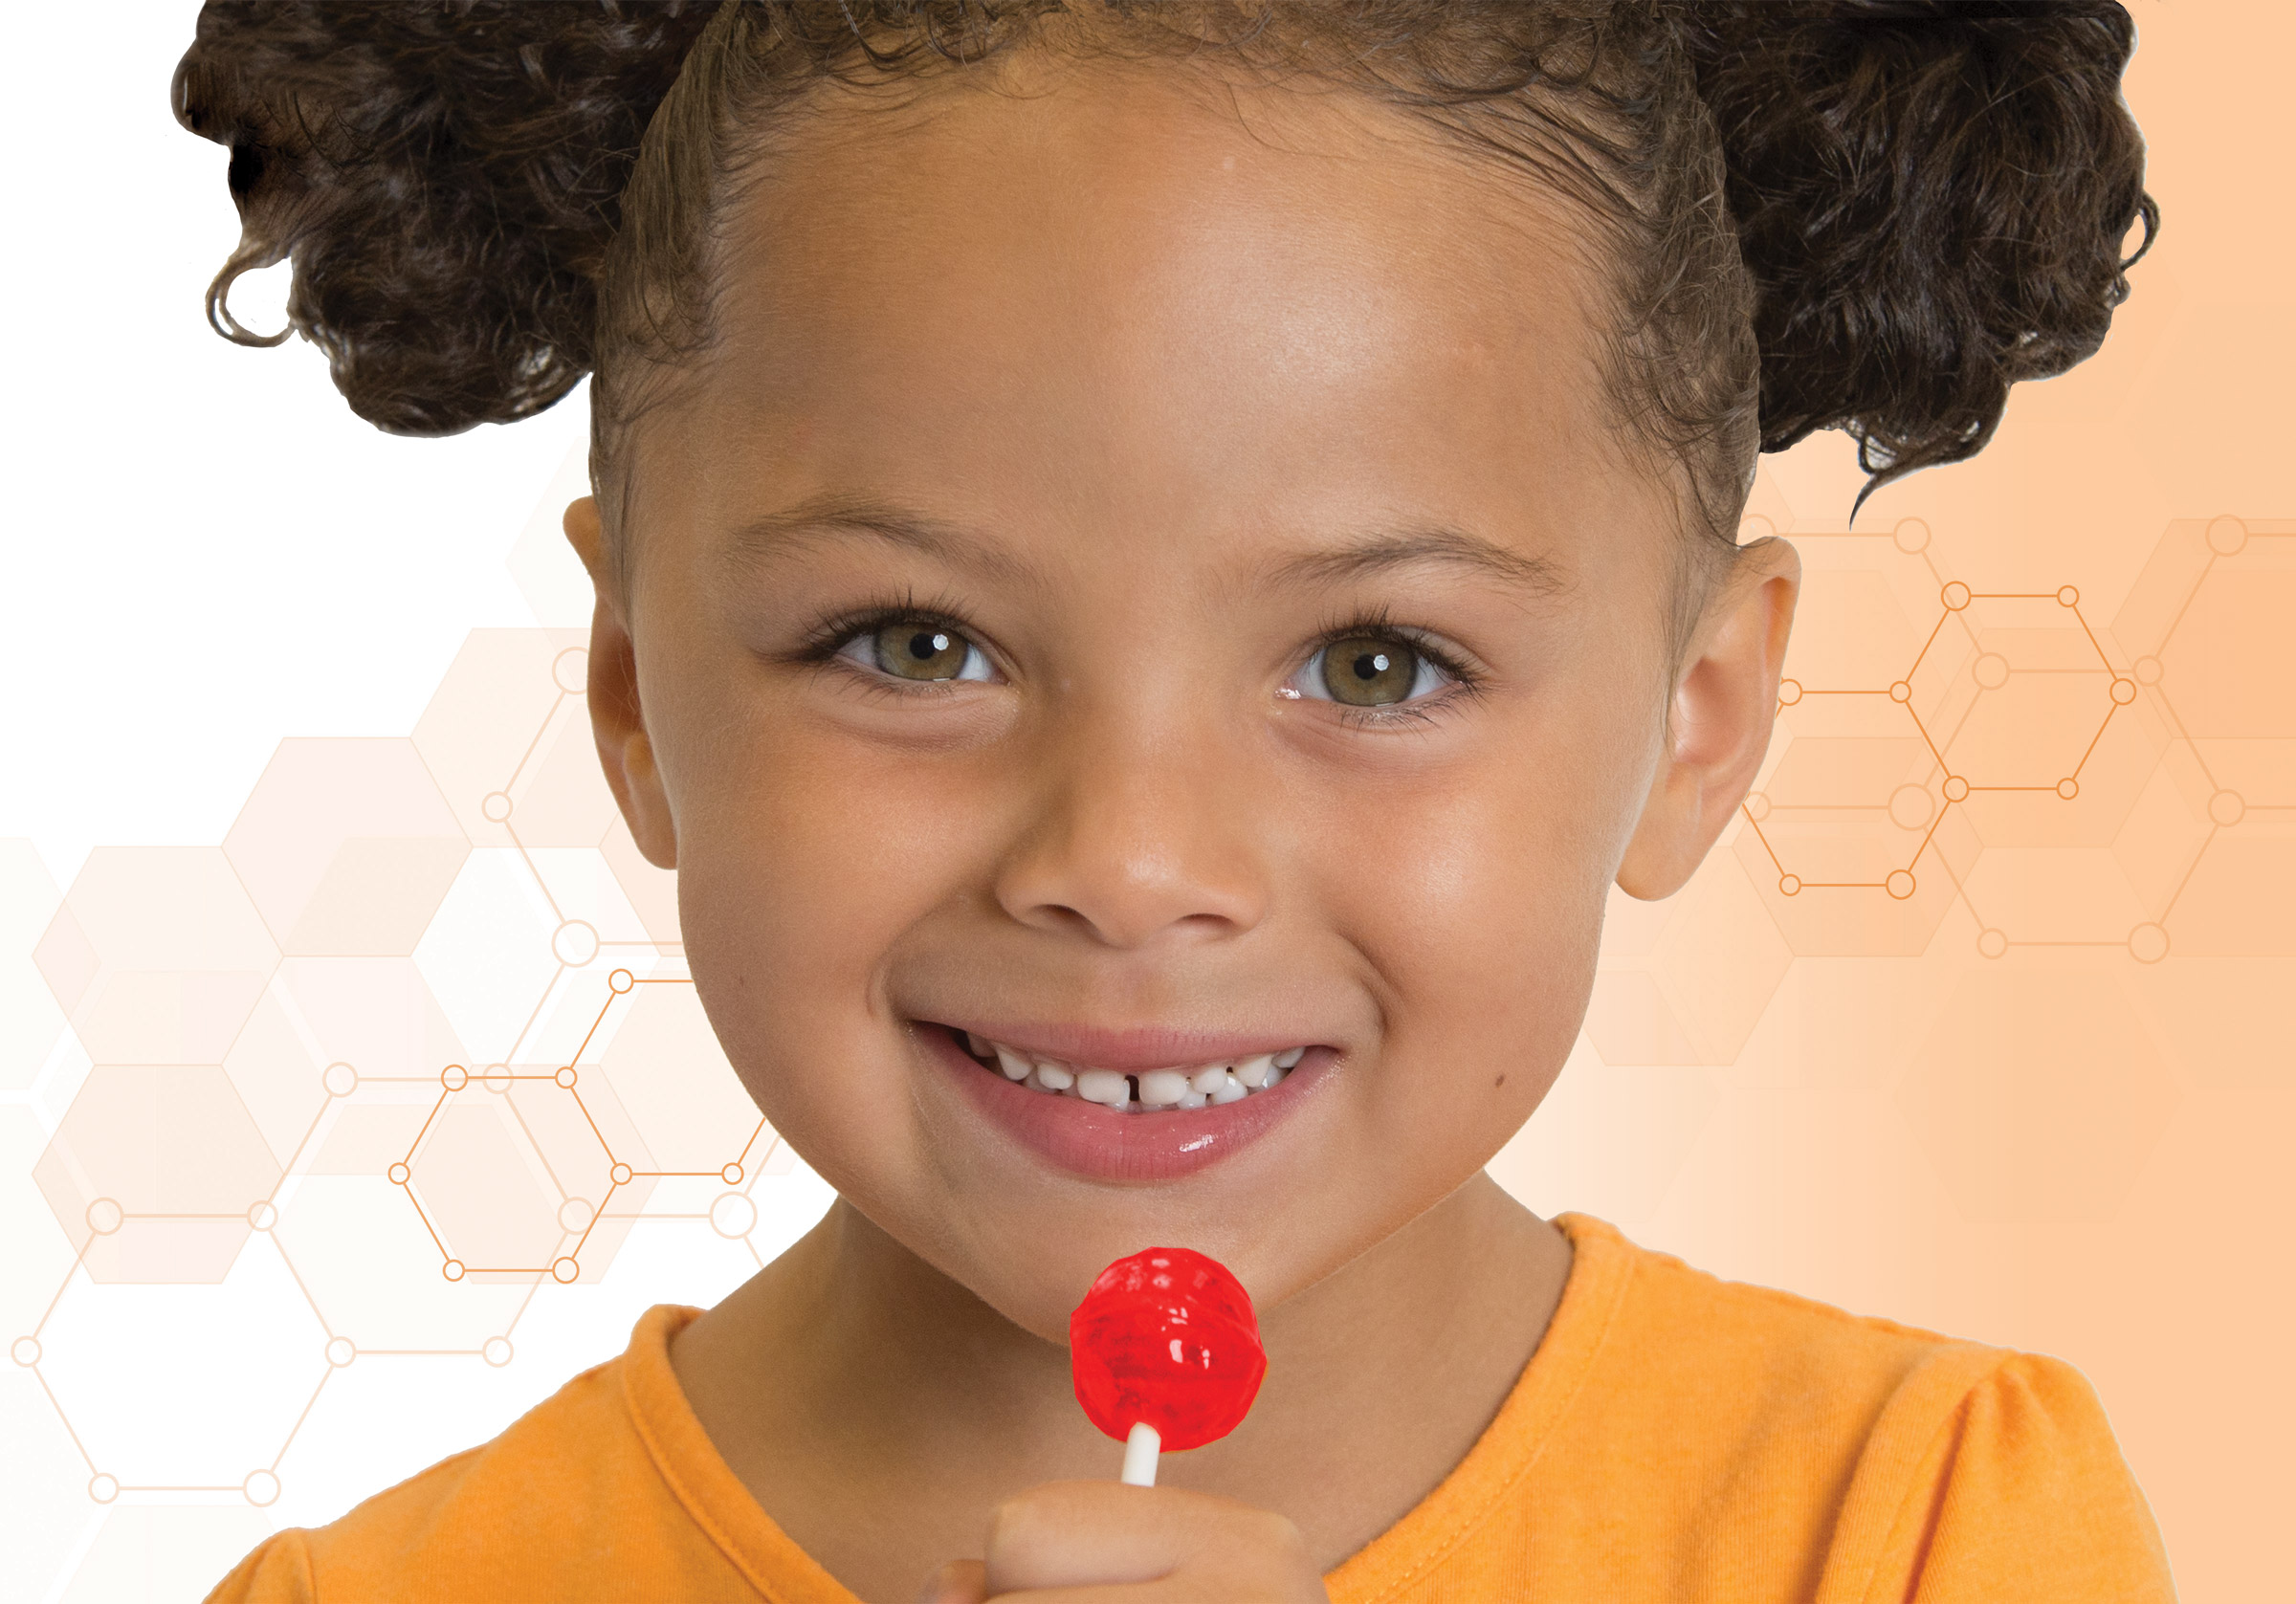 Little girl holding a bright red lollipop